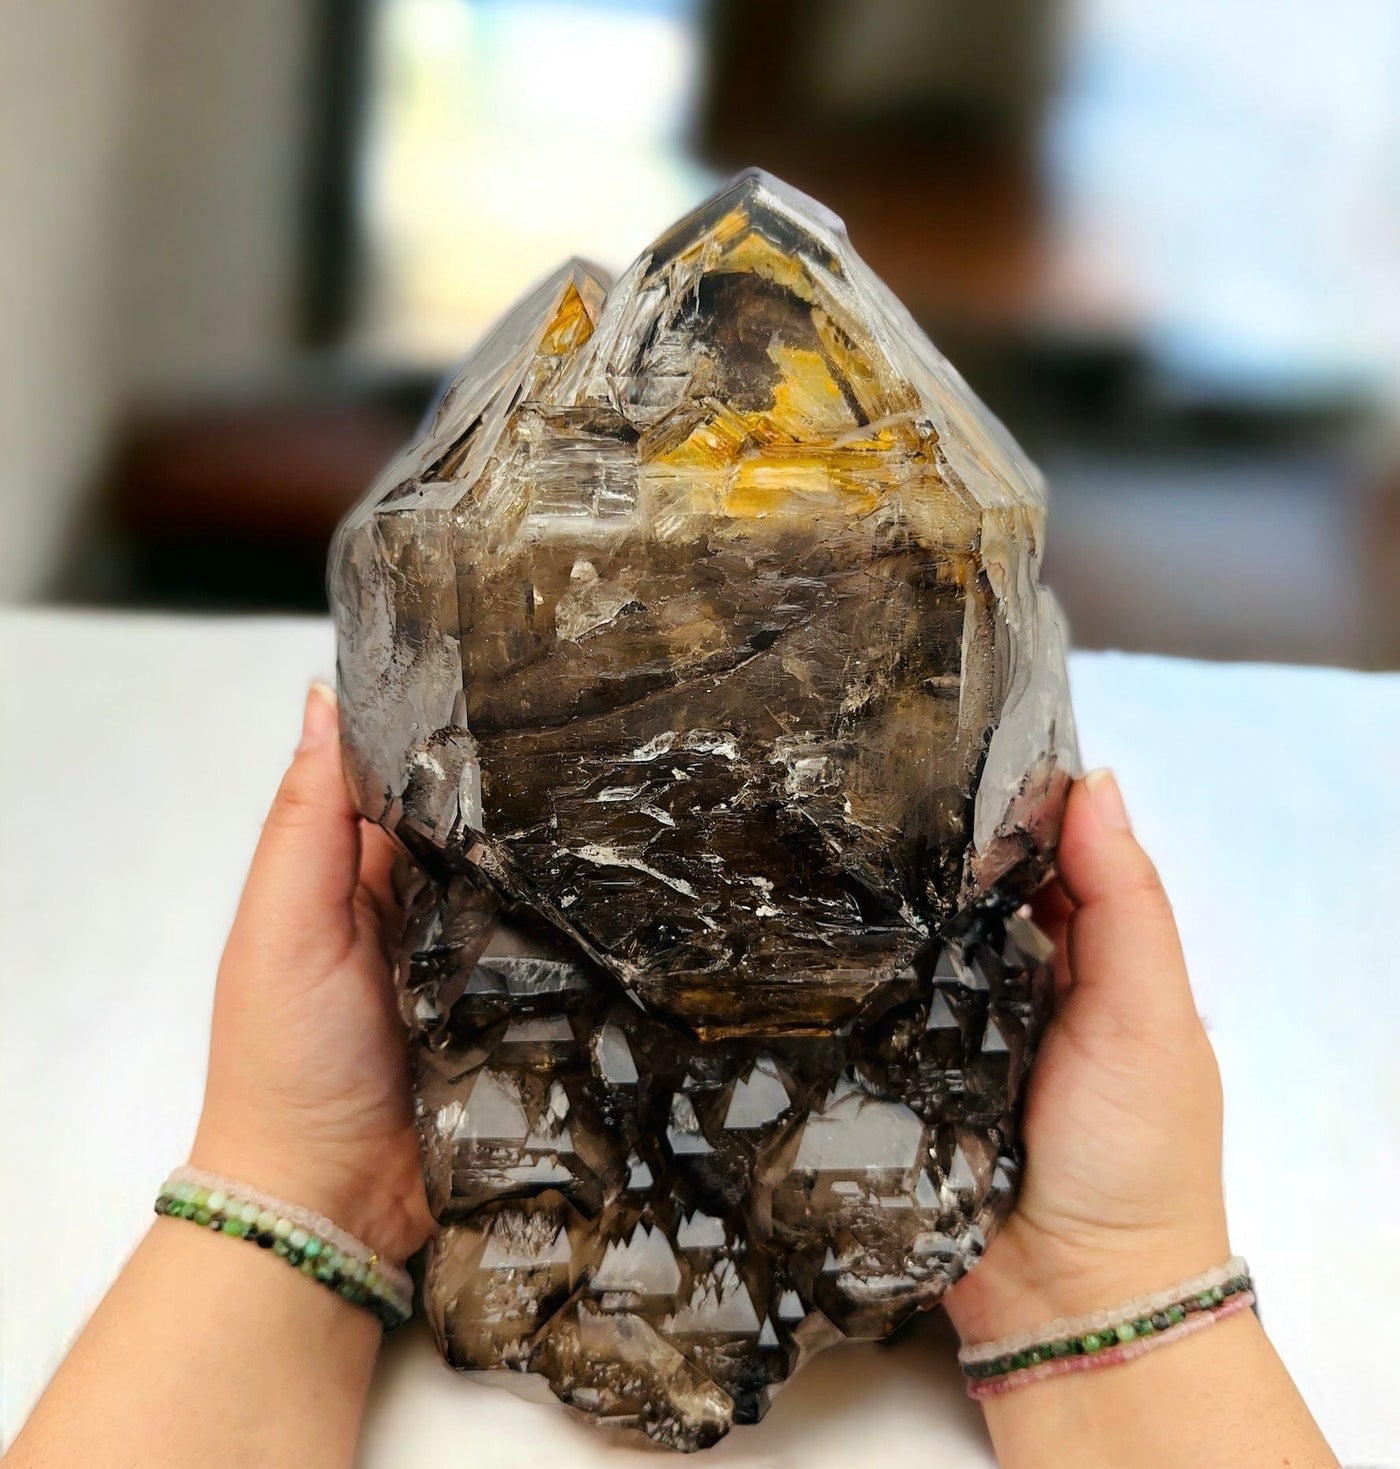 Elestial Alligator Smokey Quartz Crystal - Collectors Piece in hand for size reference 